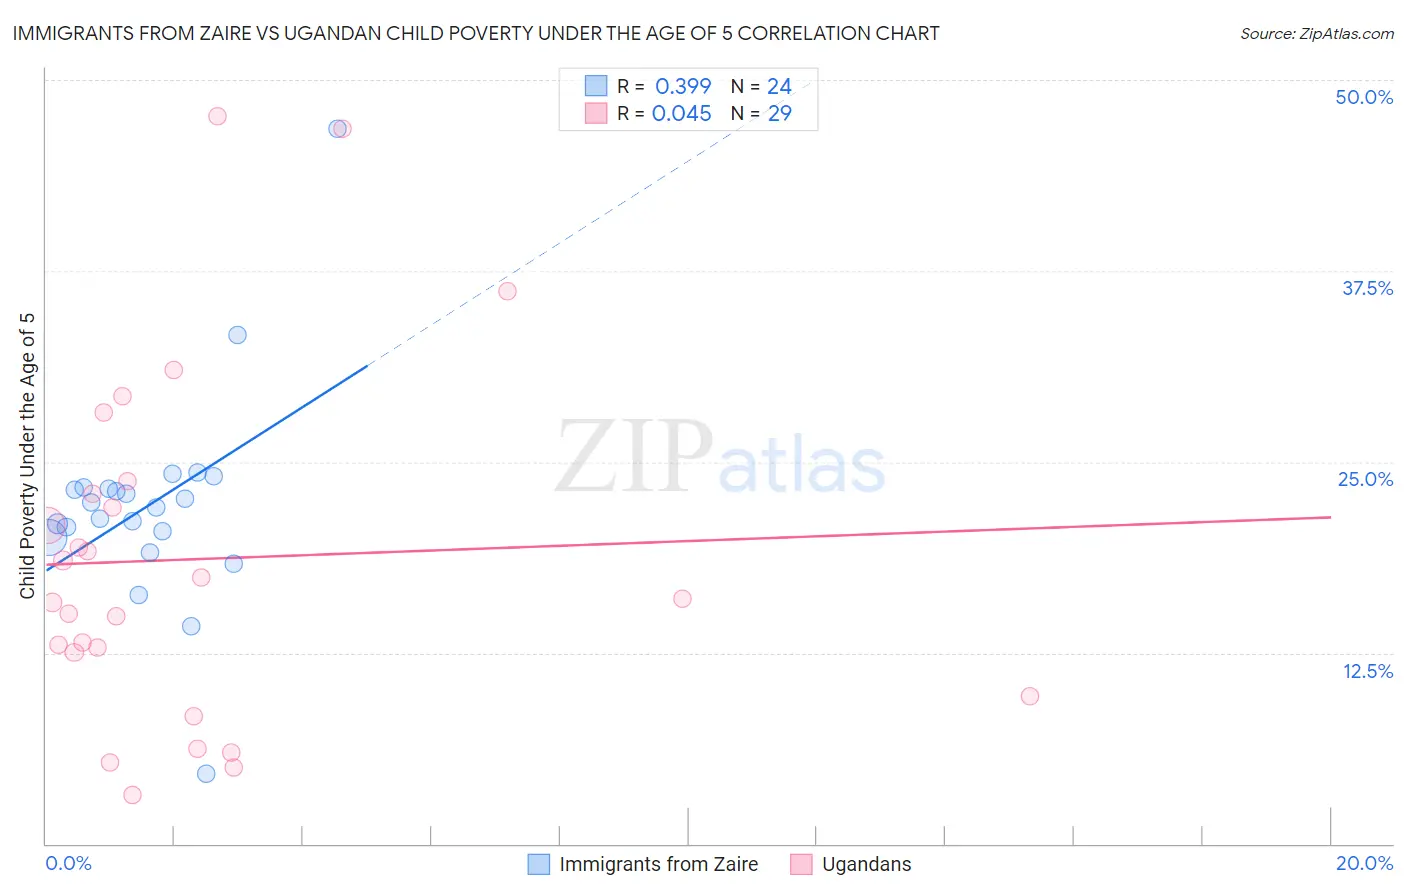 Immigrants from Zaire vs Ugandan Child Poverty Under the Age of 5